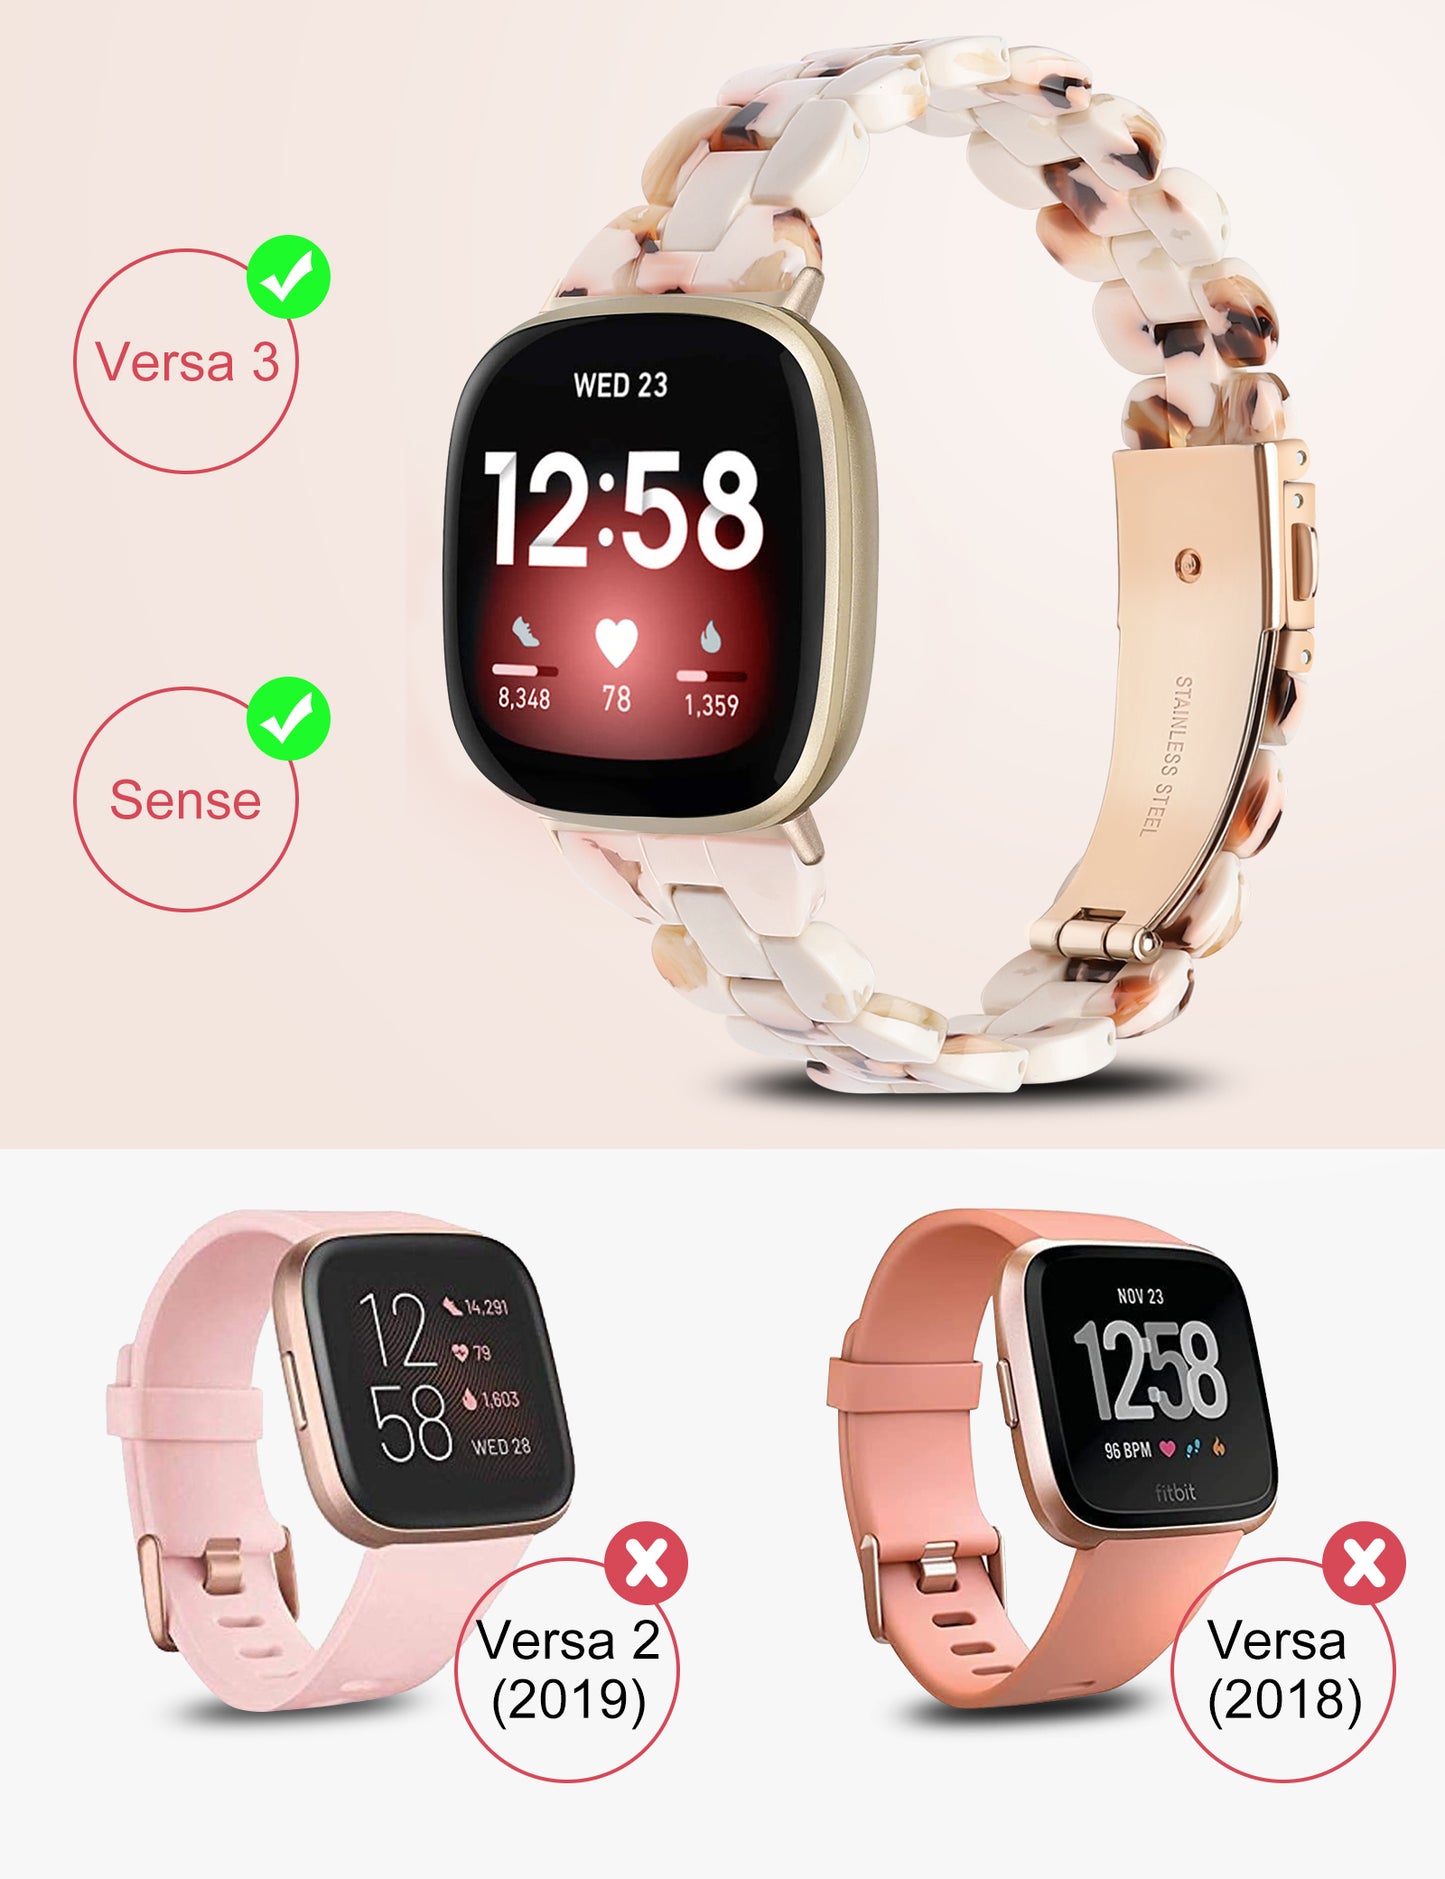 TOYOUTHS Slim Cute Resin Bands Compatible with Fitbit Sense Bands Women, Lightweight Thin Sense Watch Bands Dressy Bracelets Elegant Accessories for Fitbit Versa 3 Bands Women